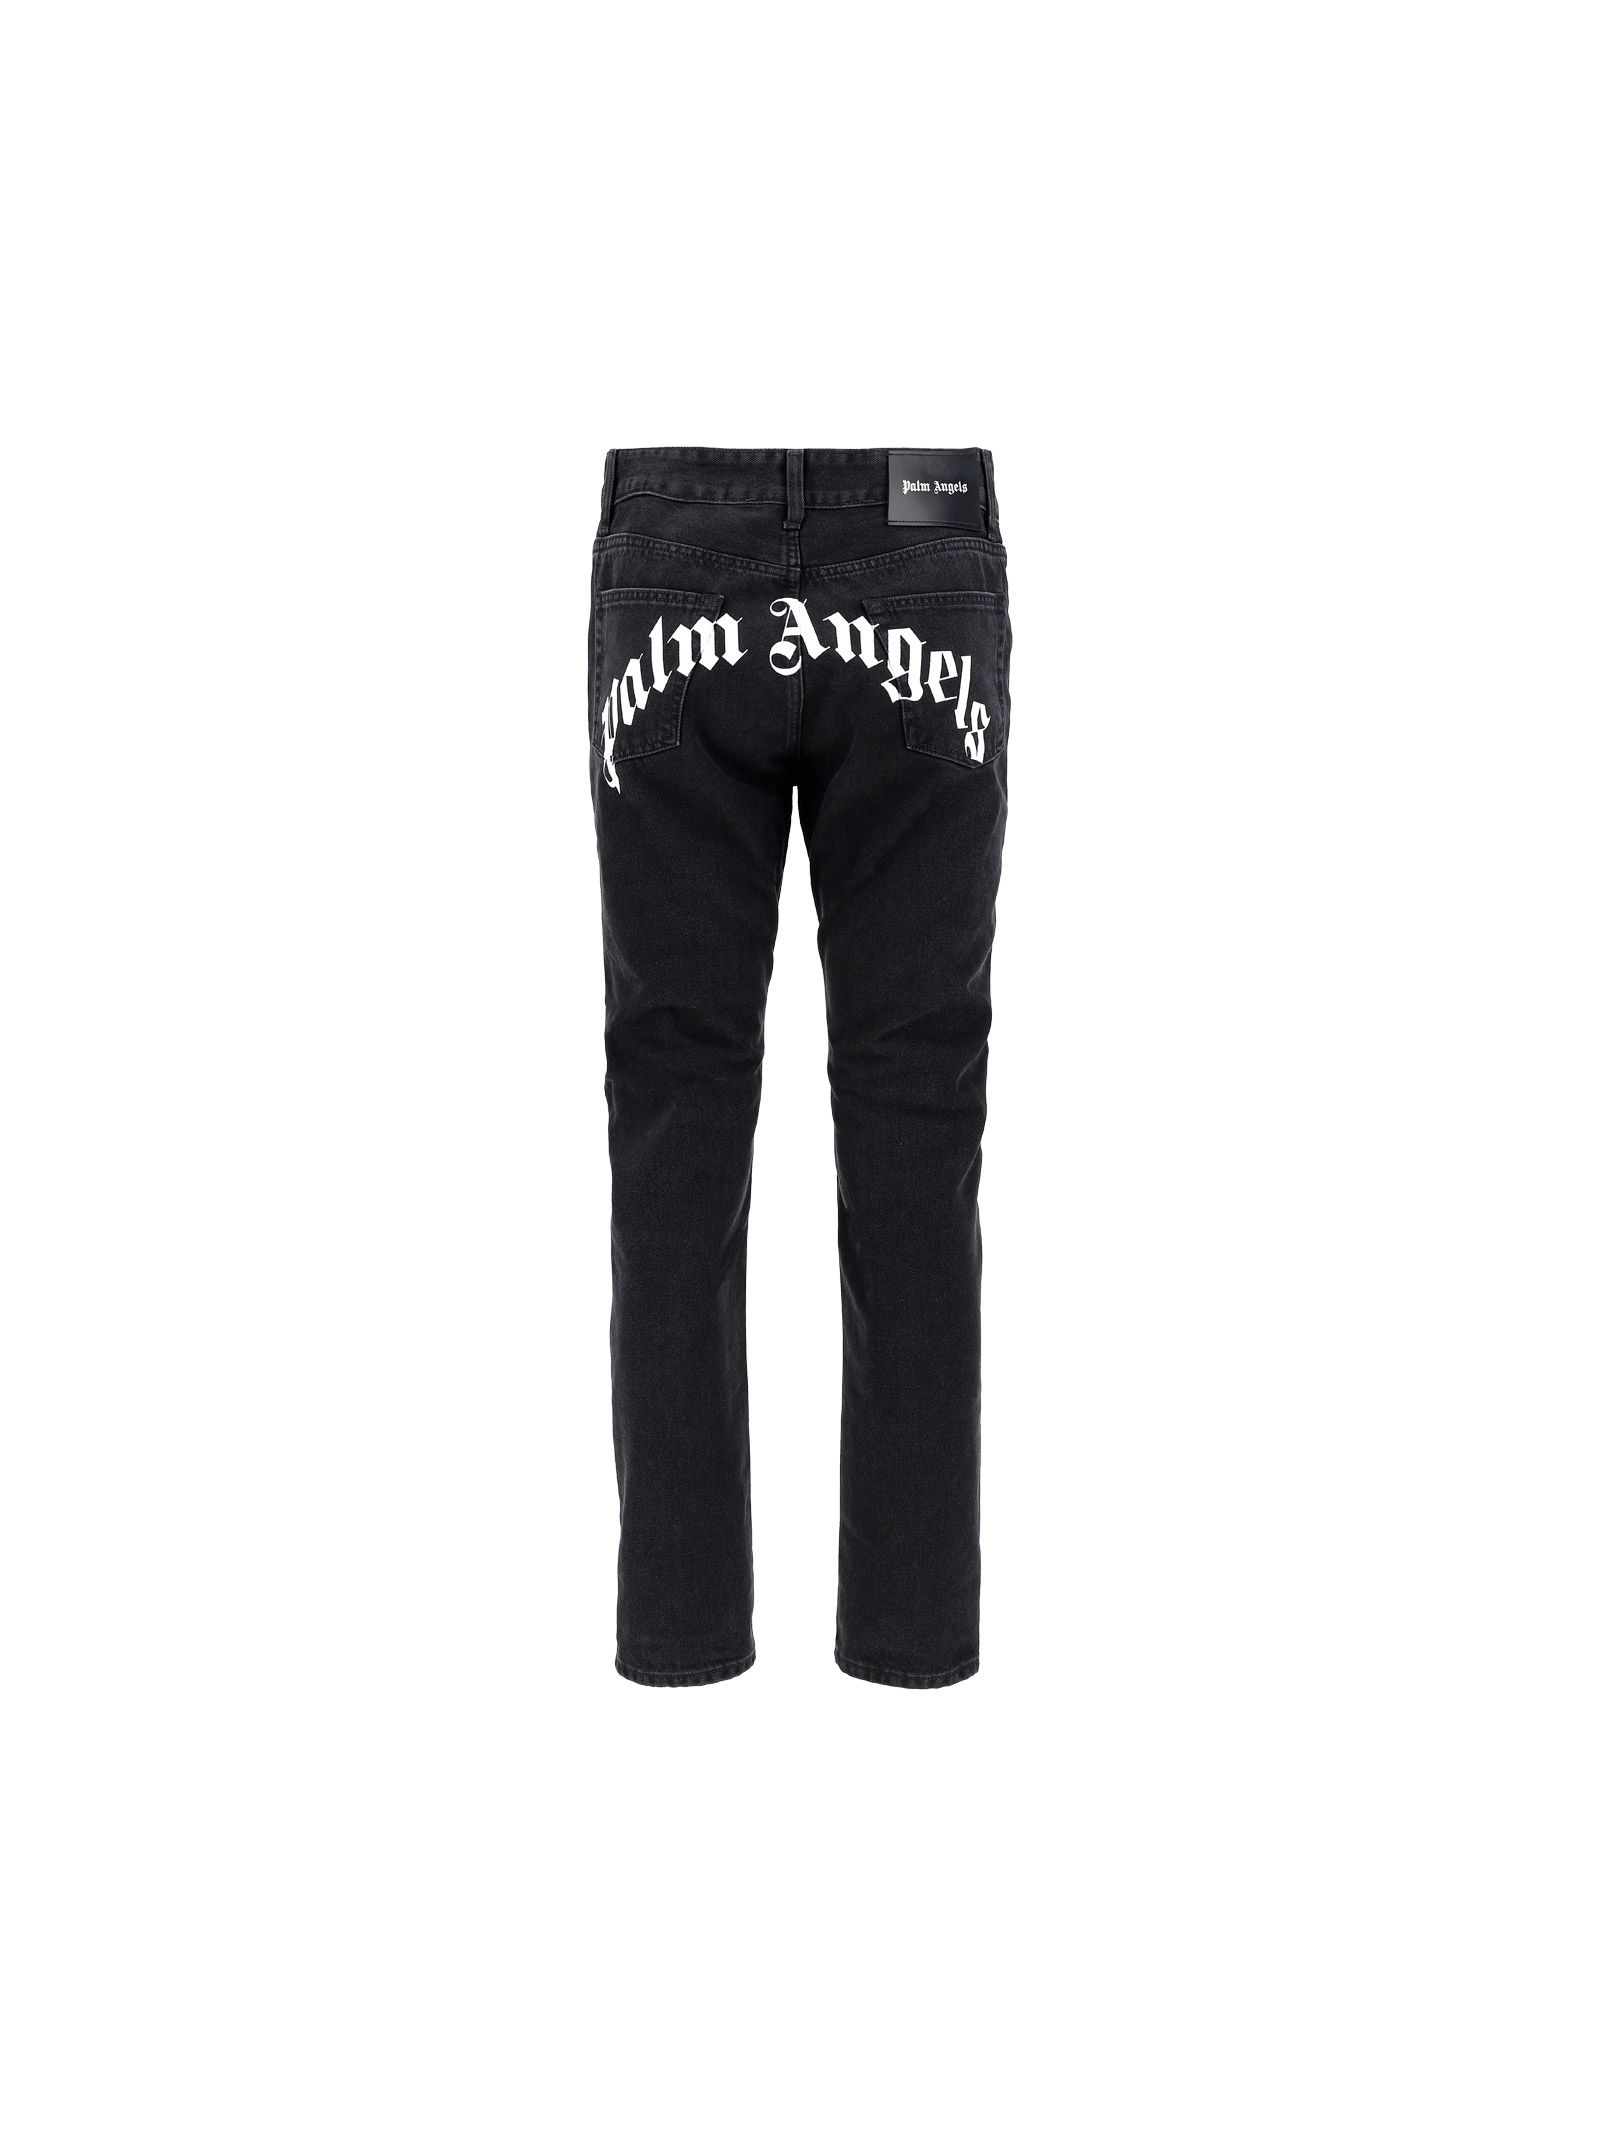 Palm Angels Jeans | italist, ALWAYS LIKE A SALE